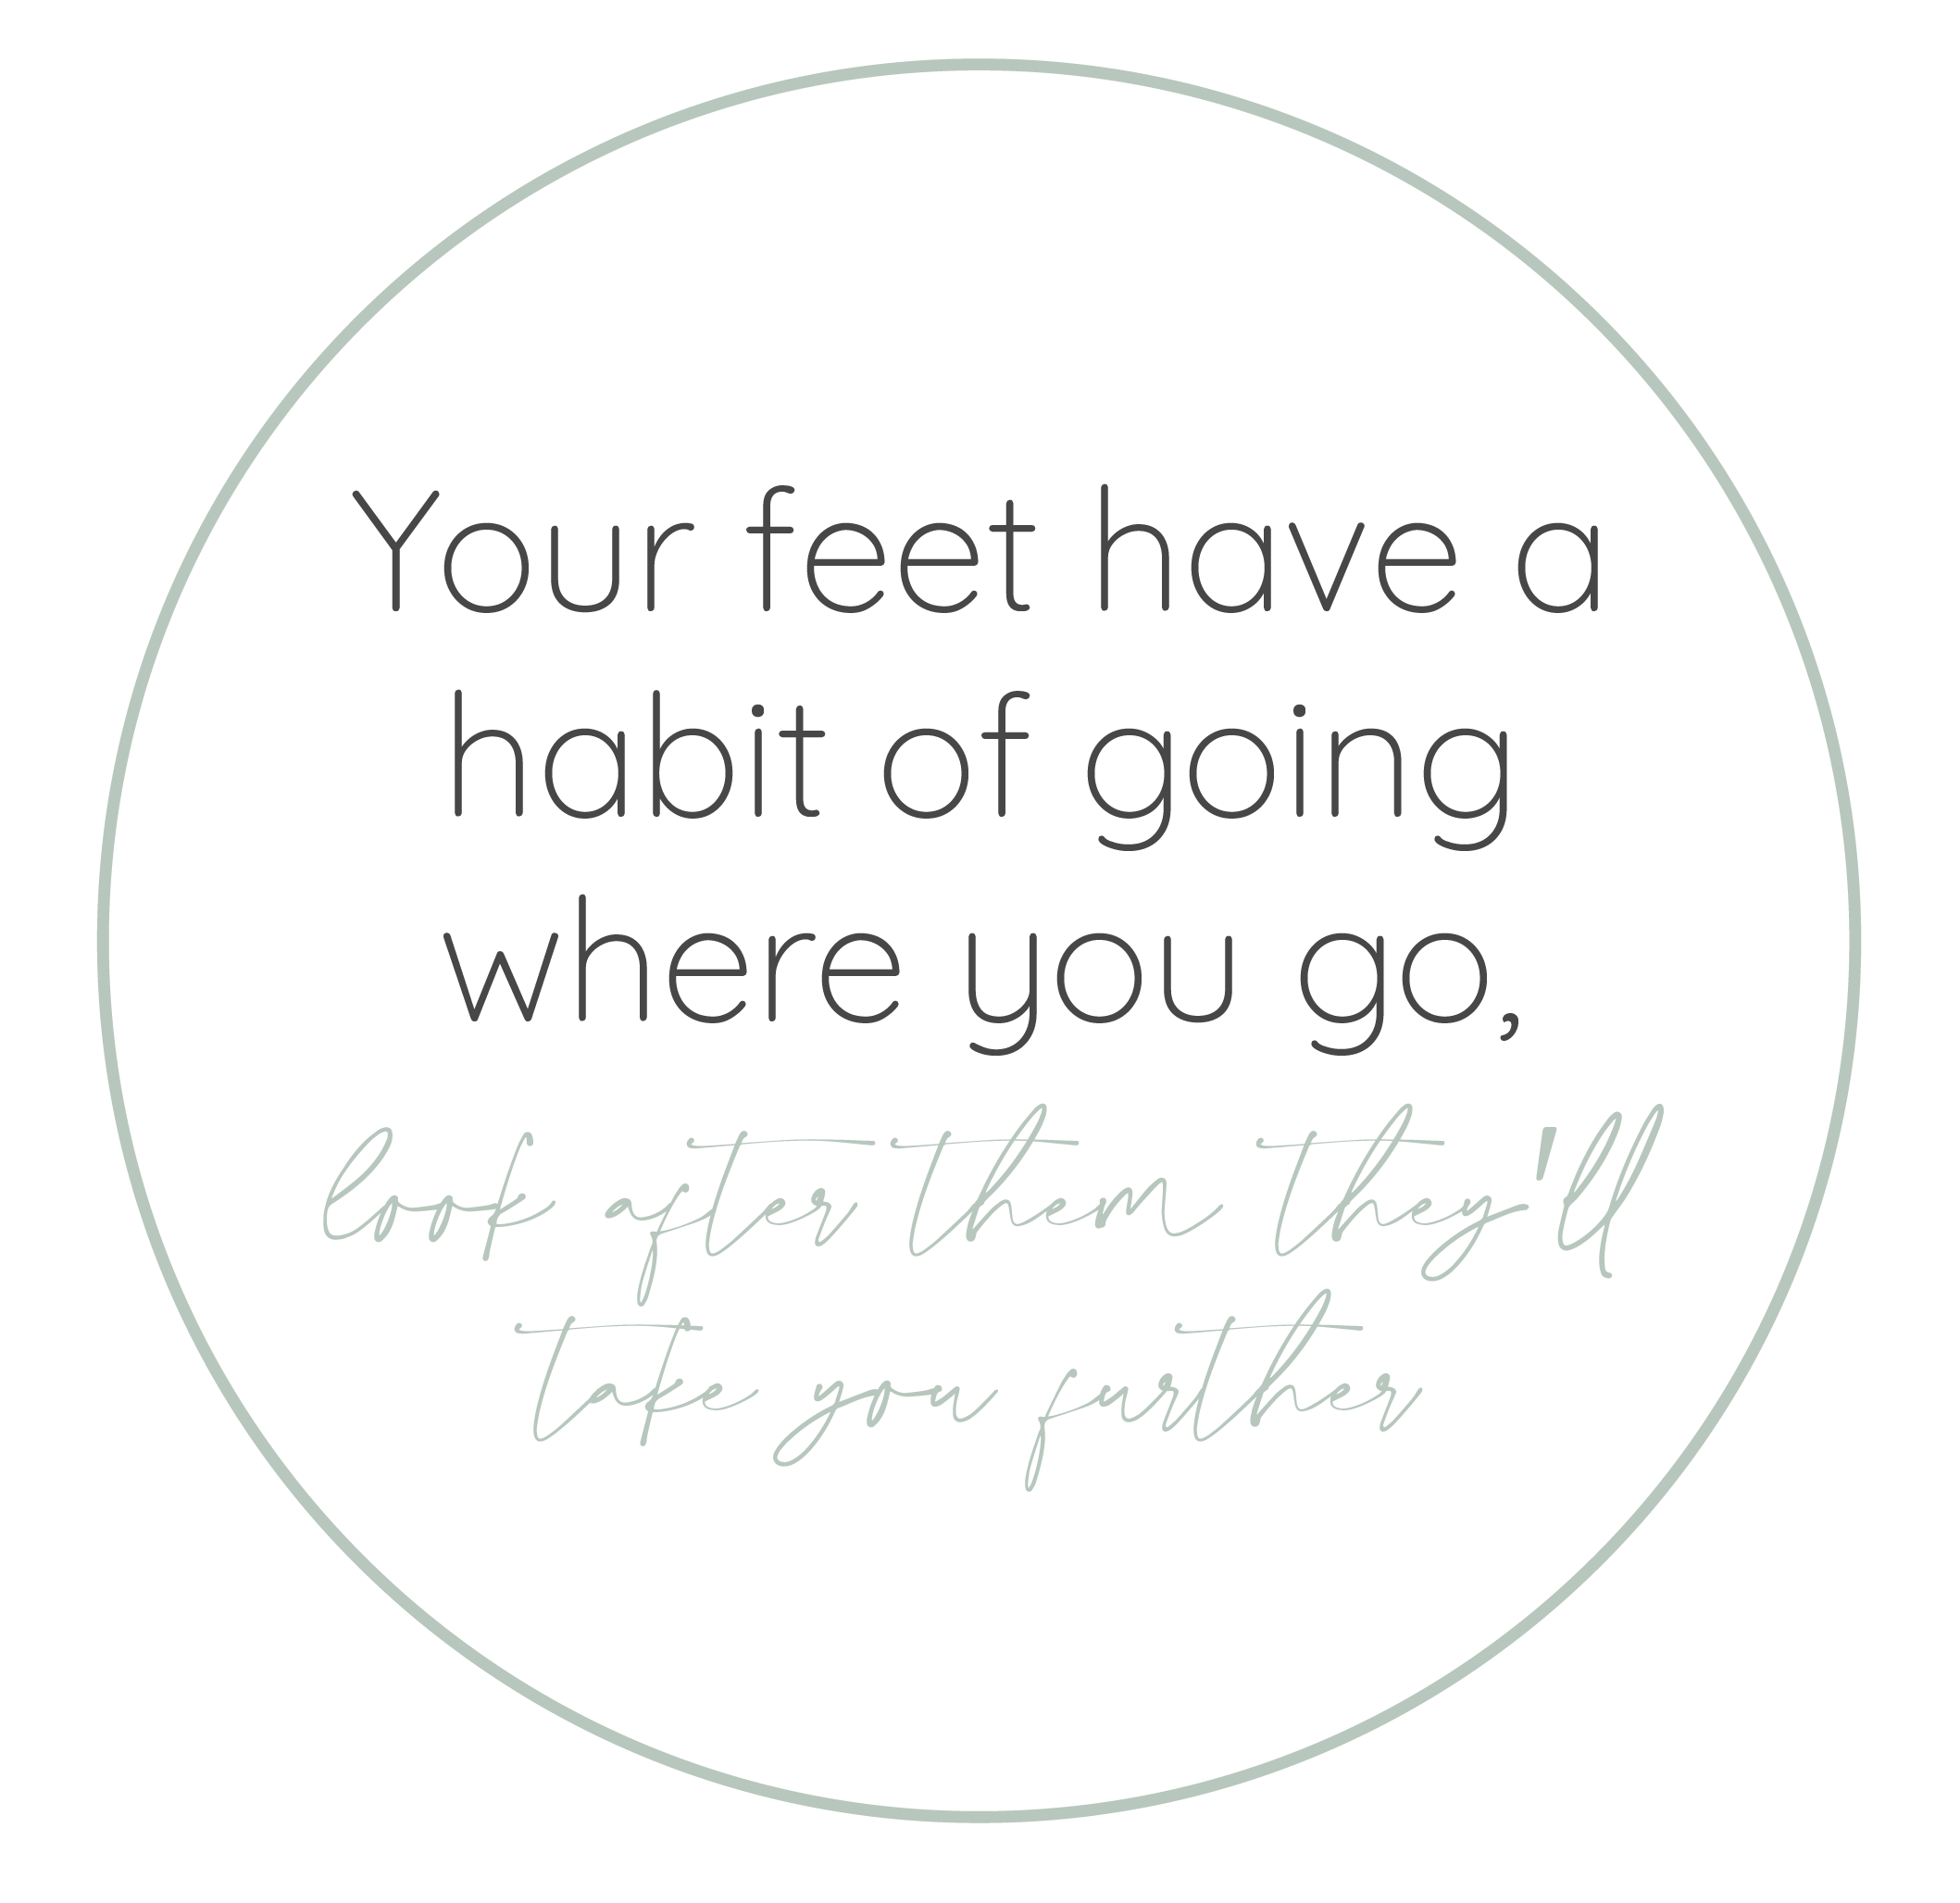 Your feet have a habit of going where you go, look after them they'll take care of you